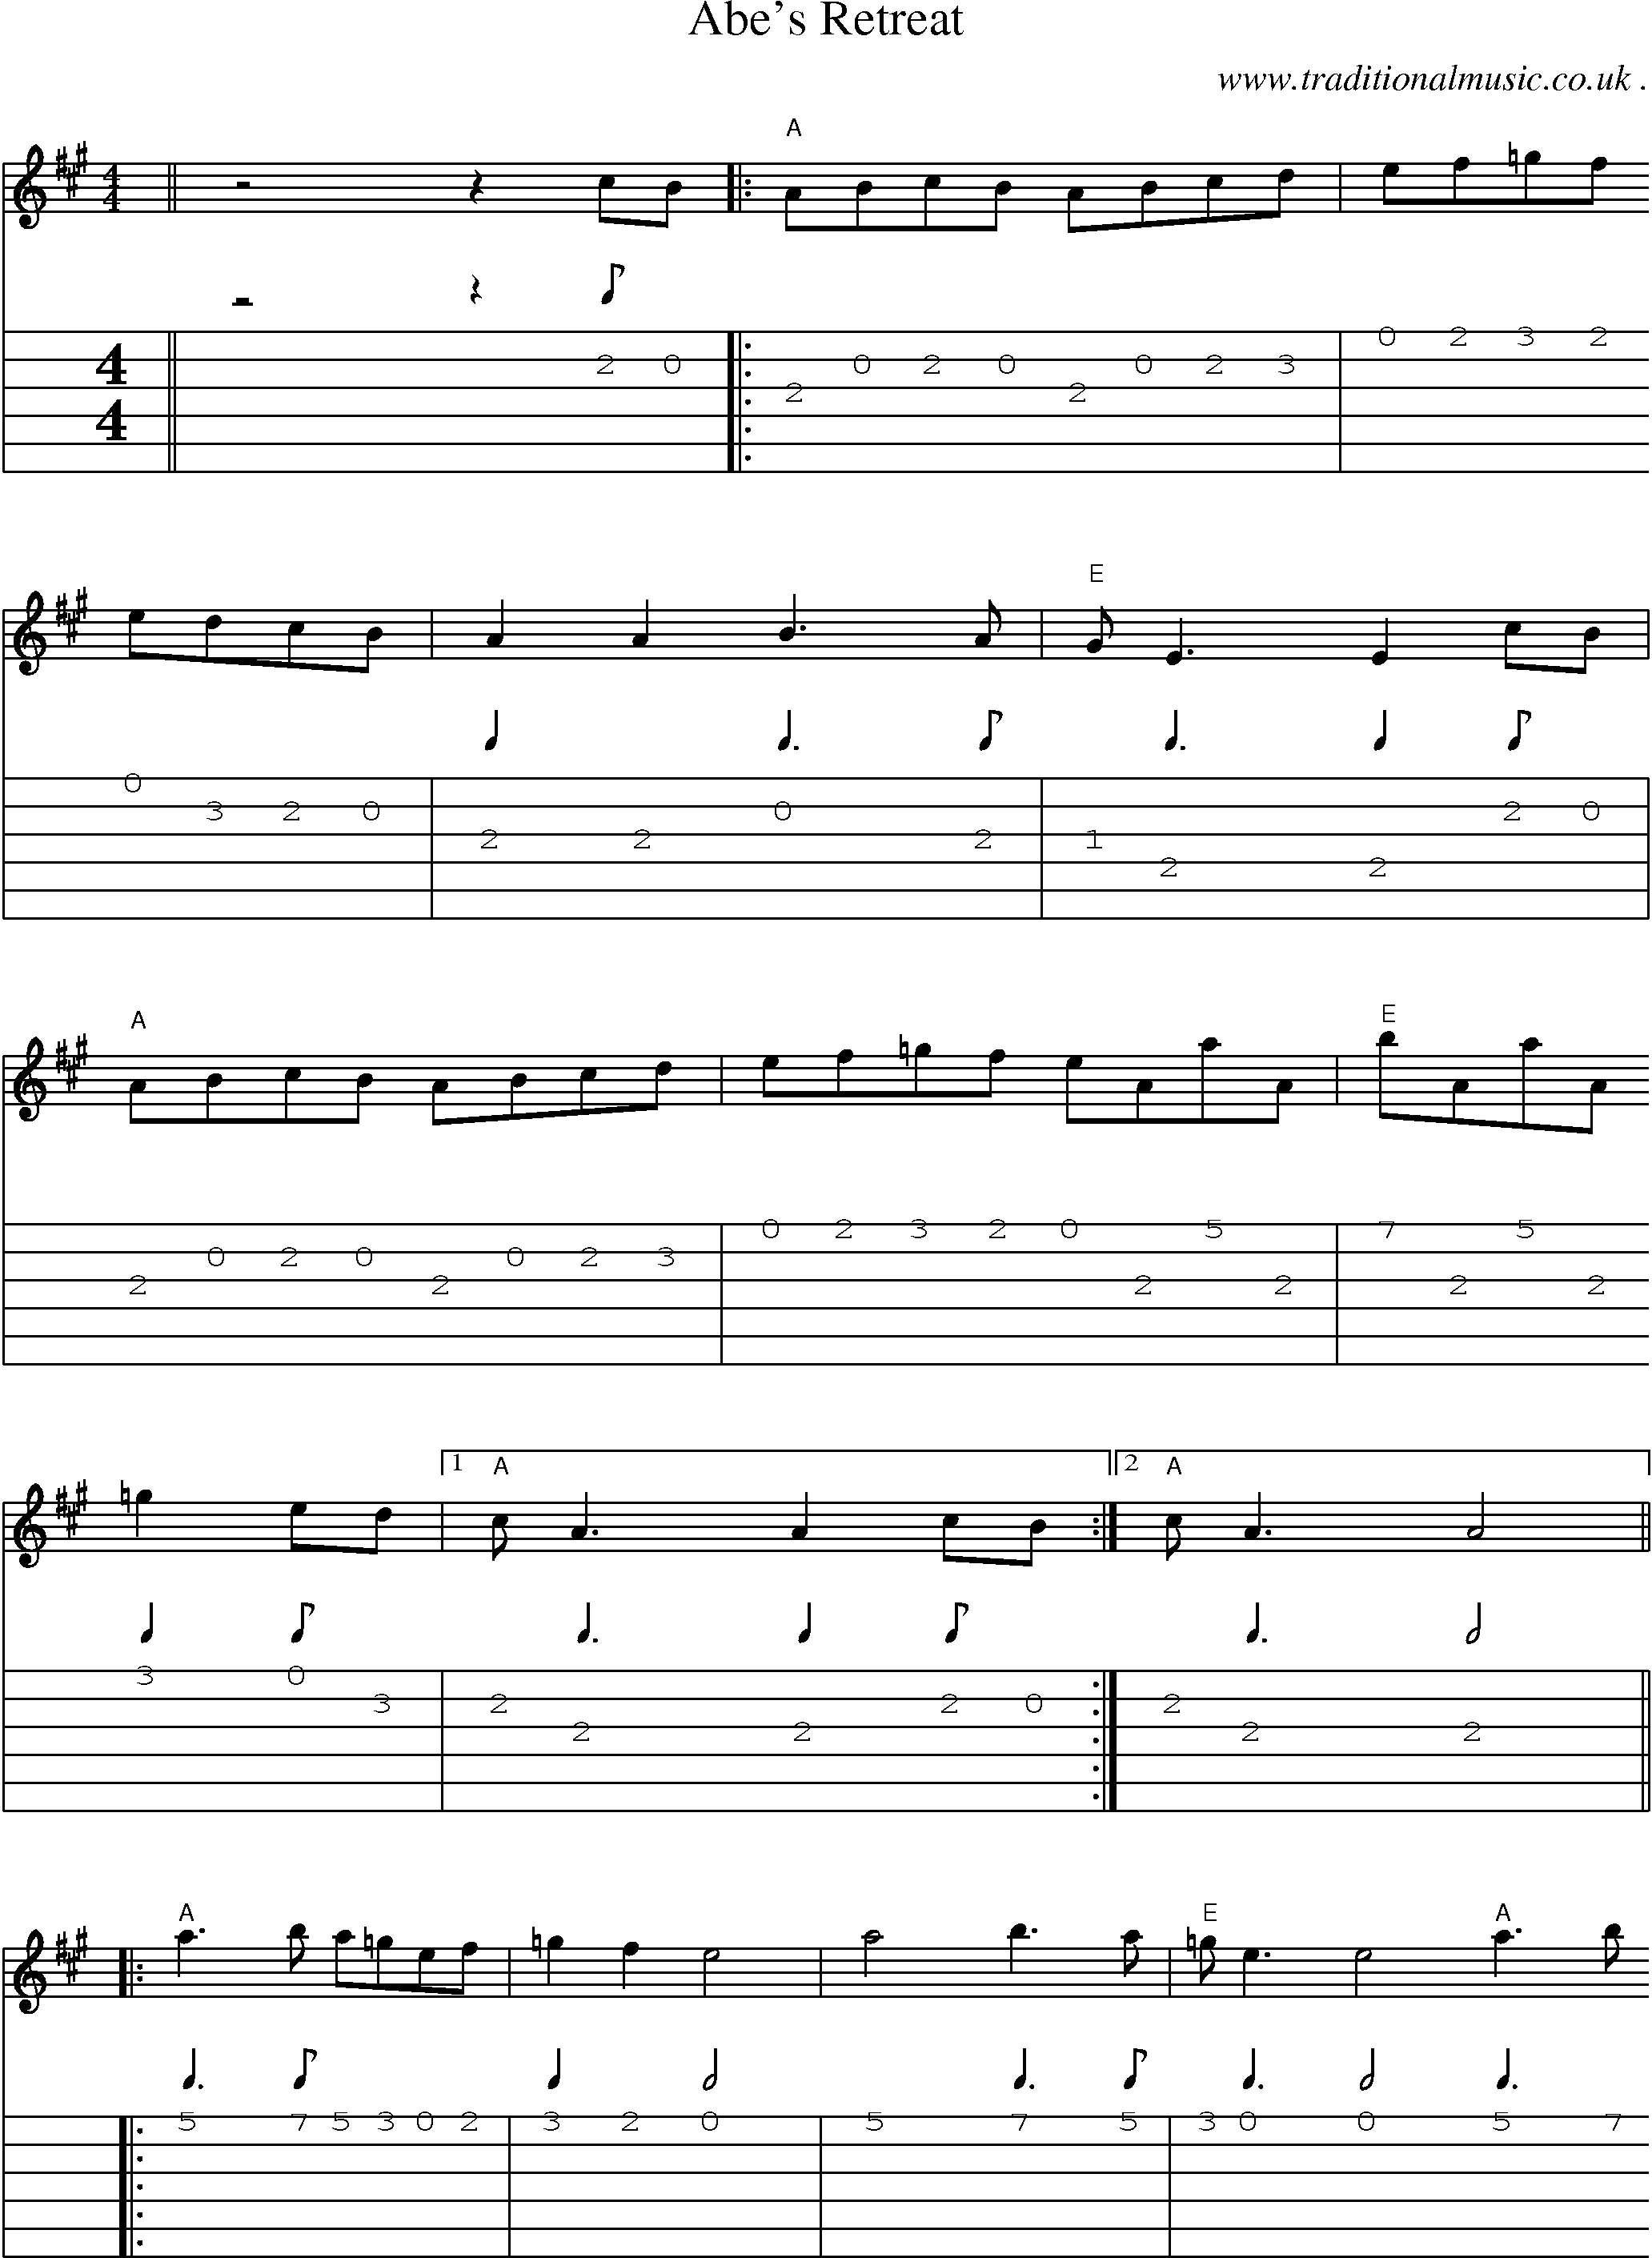 Music Score and Guitar Tabs for Abes Retreat